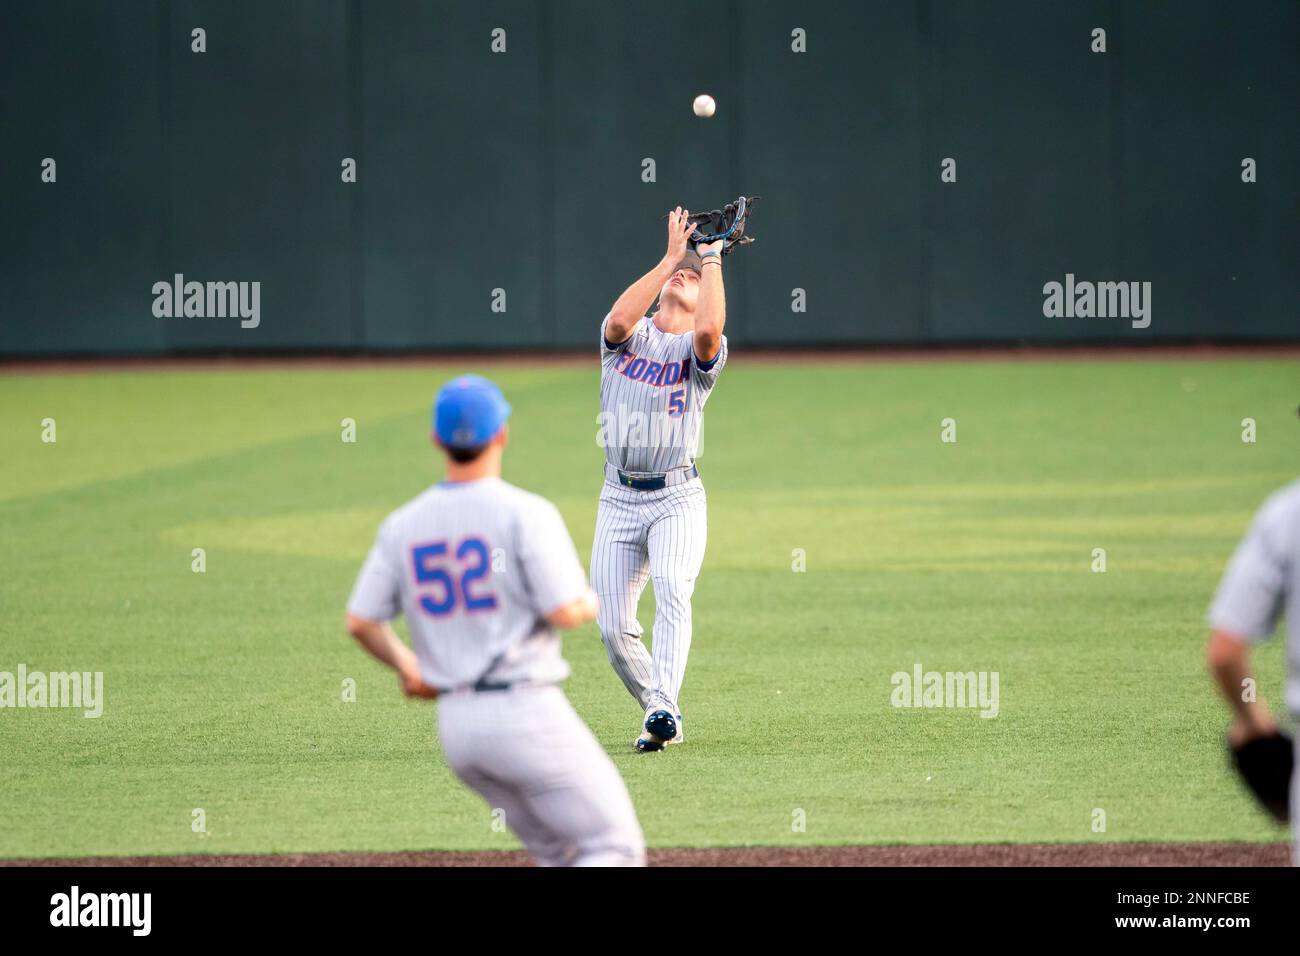 Florida Gators second baseman Colby Halter (5) makes a catch against